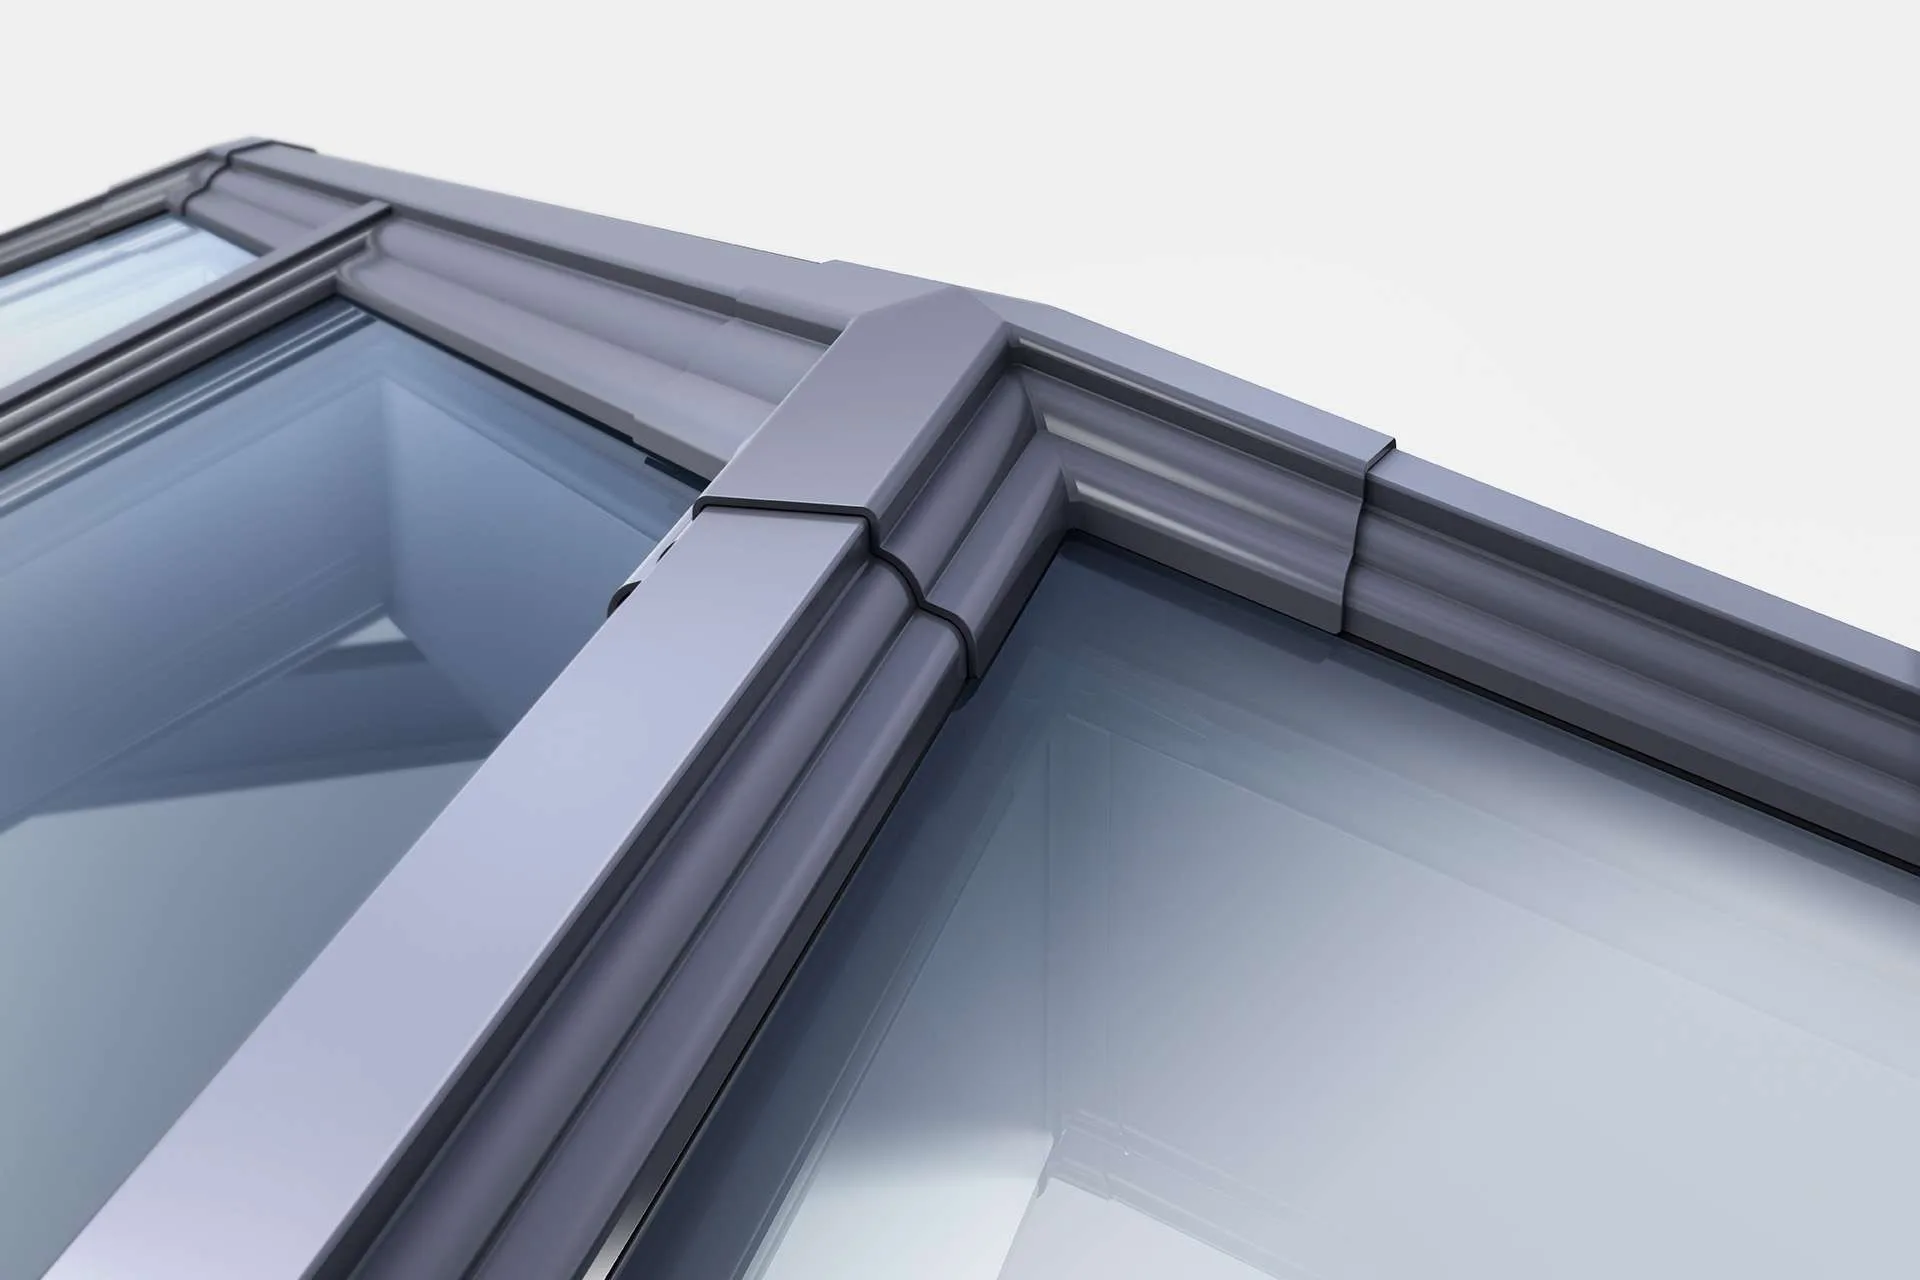 The topside of a Korniche Roof Lantern. The image highlights the simple, functional design of each component, emphasizing its ease of installation.